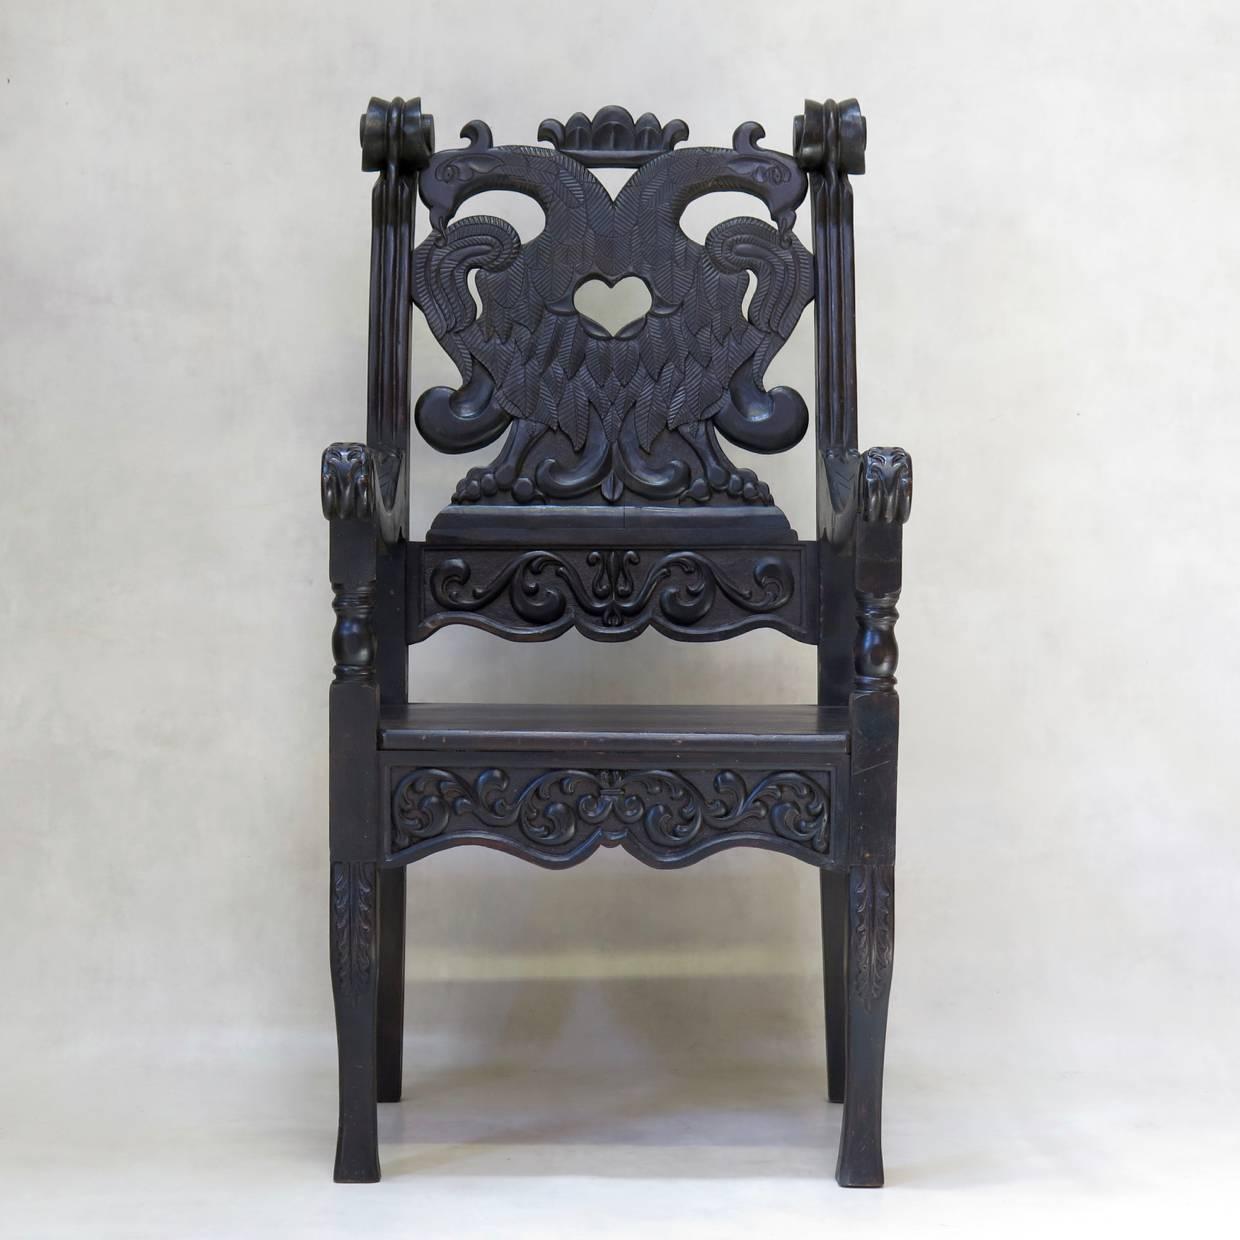 Unusual and theatrical pair of heavily carved armchairs, the backs featuring a pair of birds with finely detailed feathers.